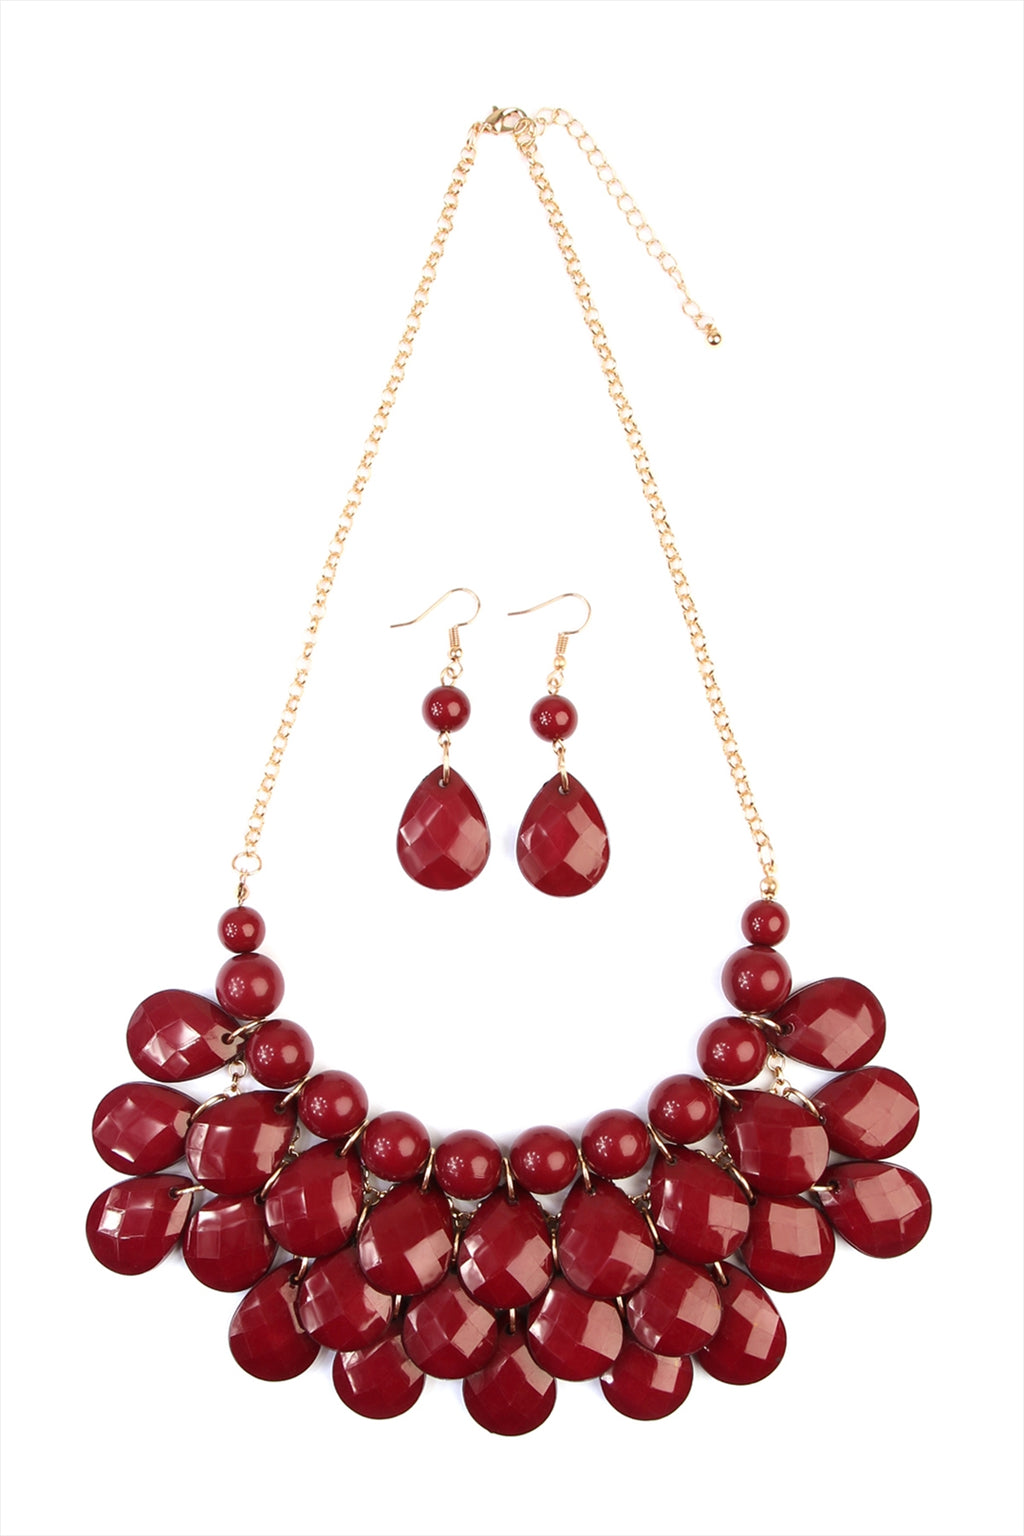 Burgundy Teardrop Bubble Bib Necklace and Earring Set - Pack of 6